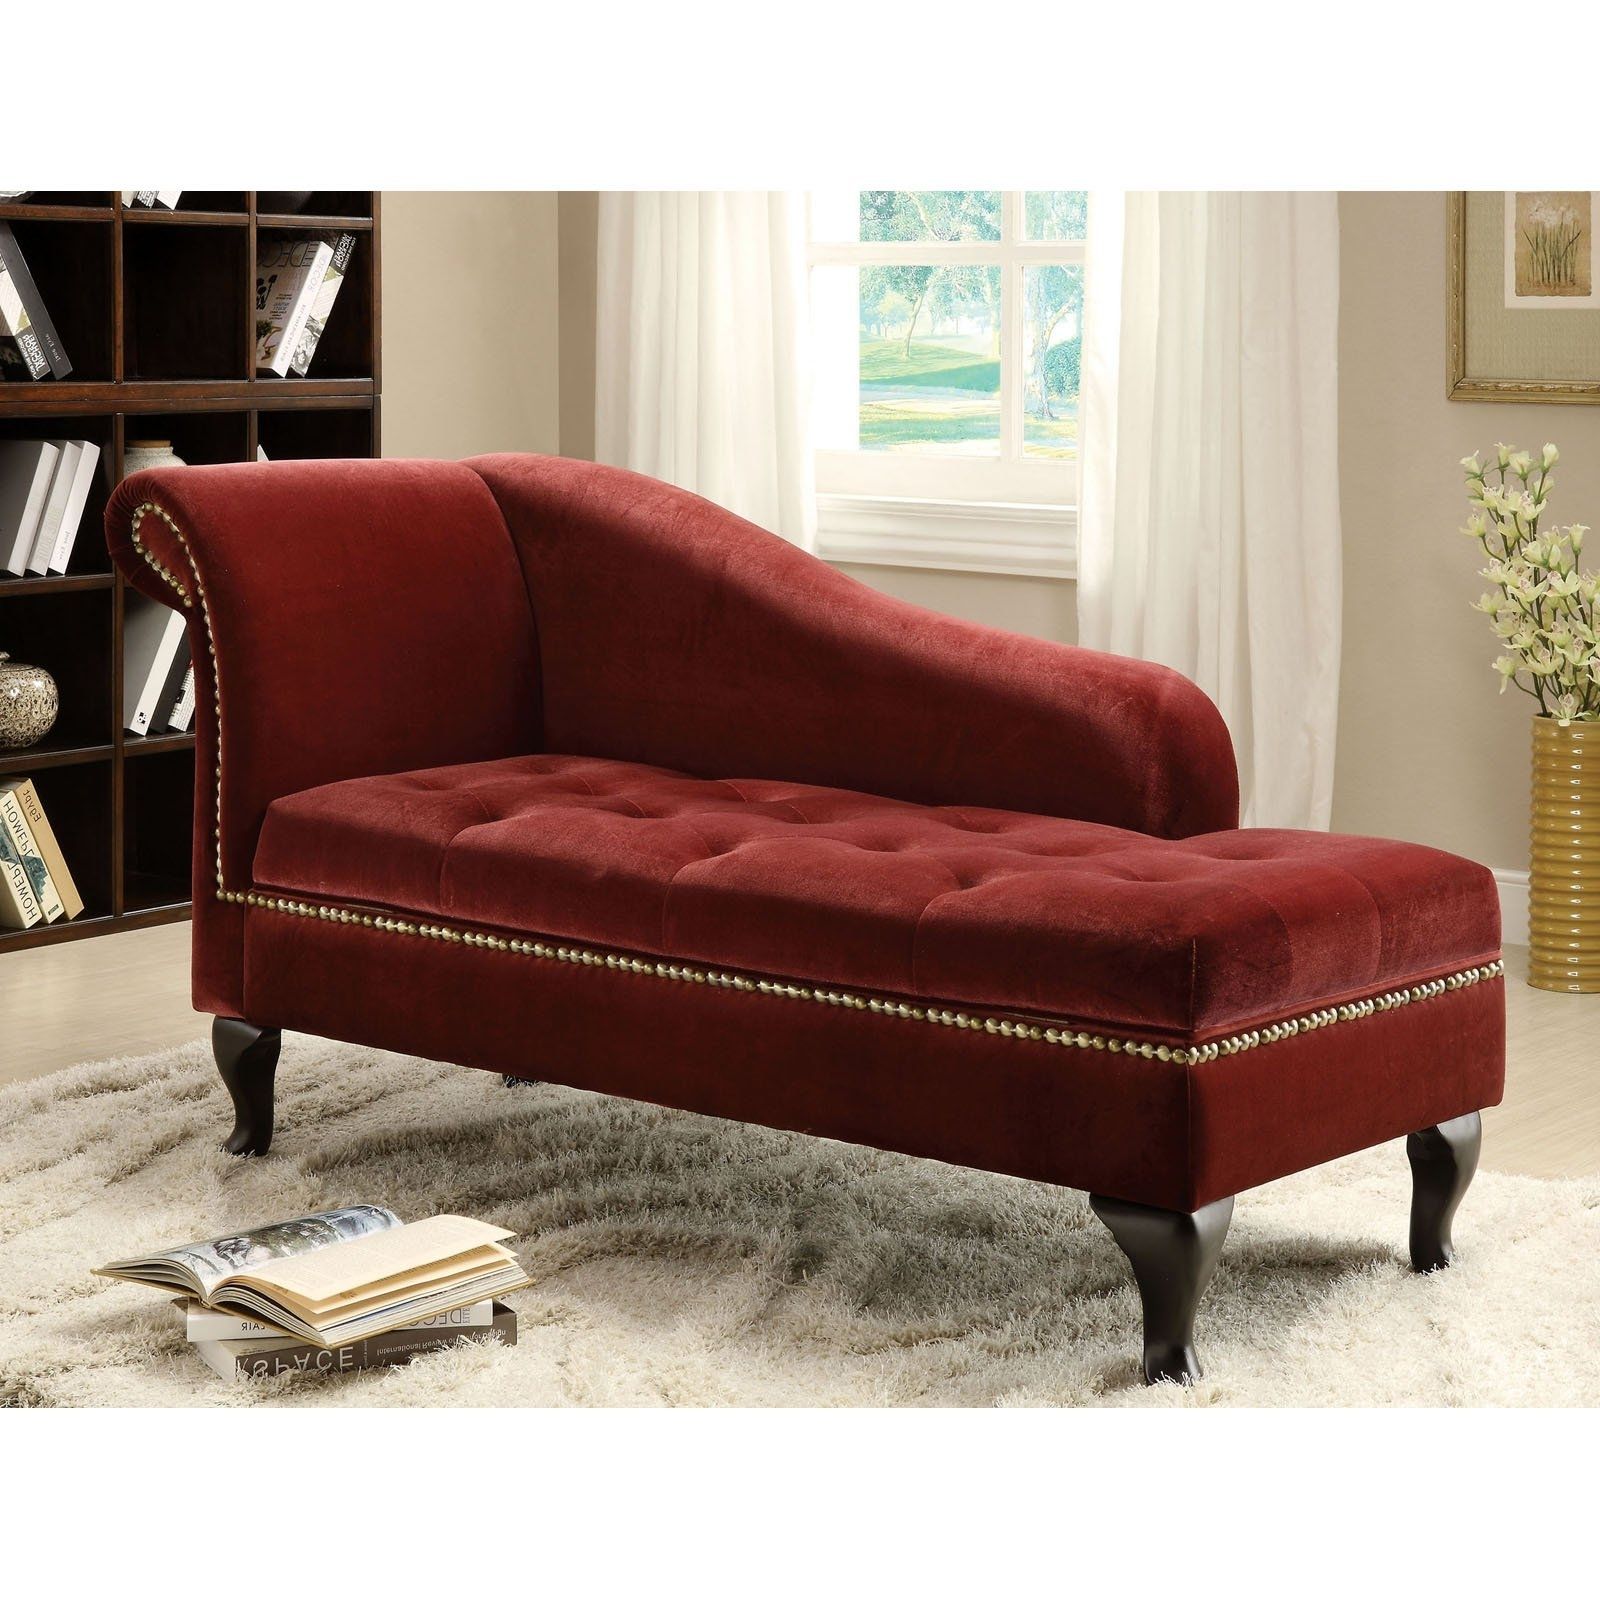 Well Known Furniture Of America Visage Fabric Storage Chaise – Colonial Red Within Fabric Chaise Lounge Chairs (View 9 of 15)